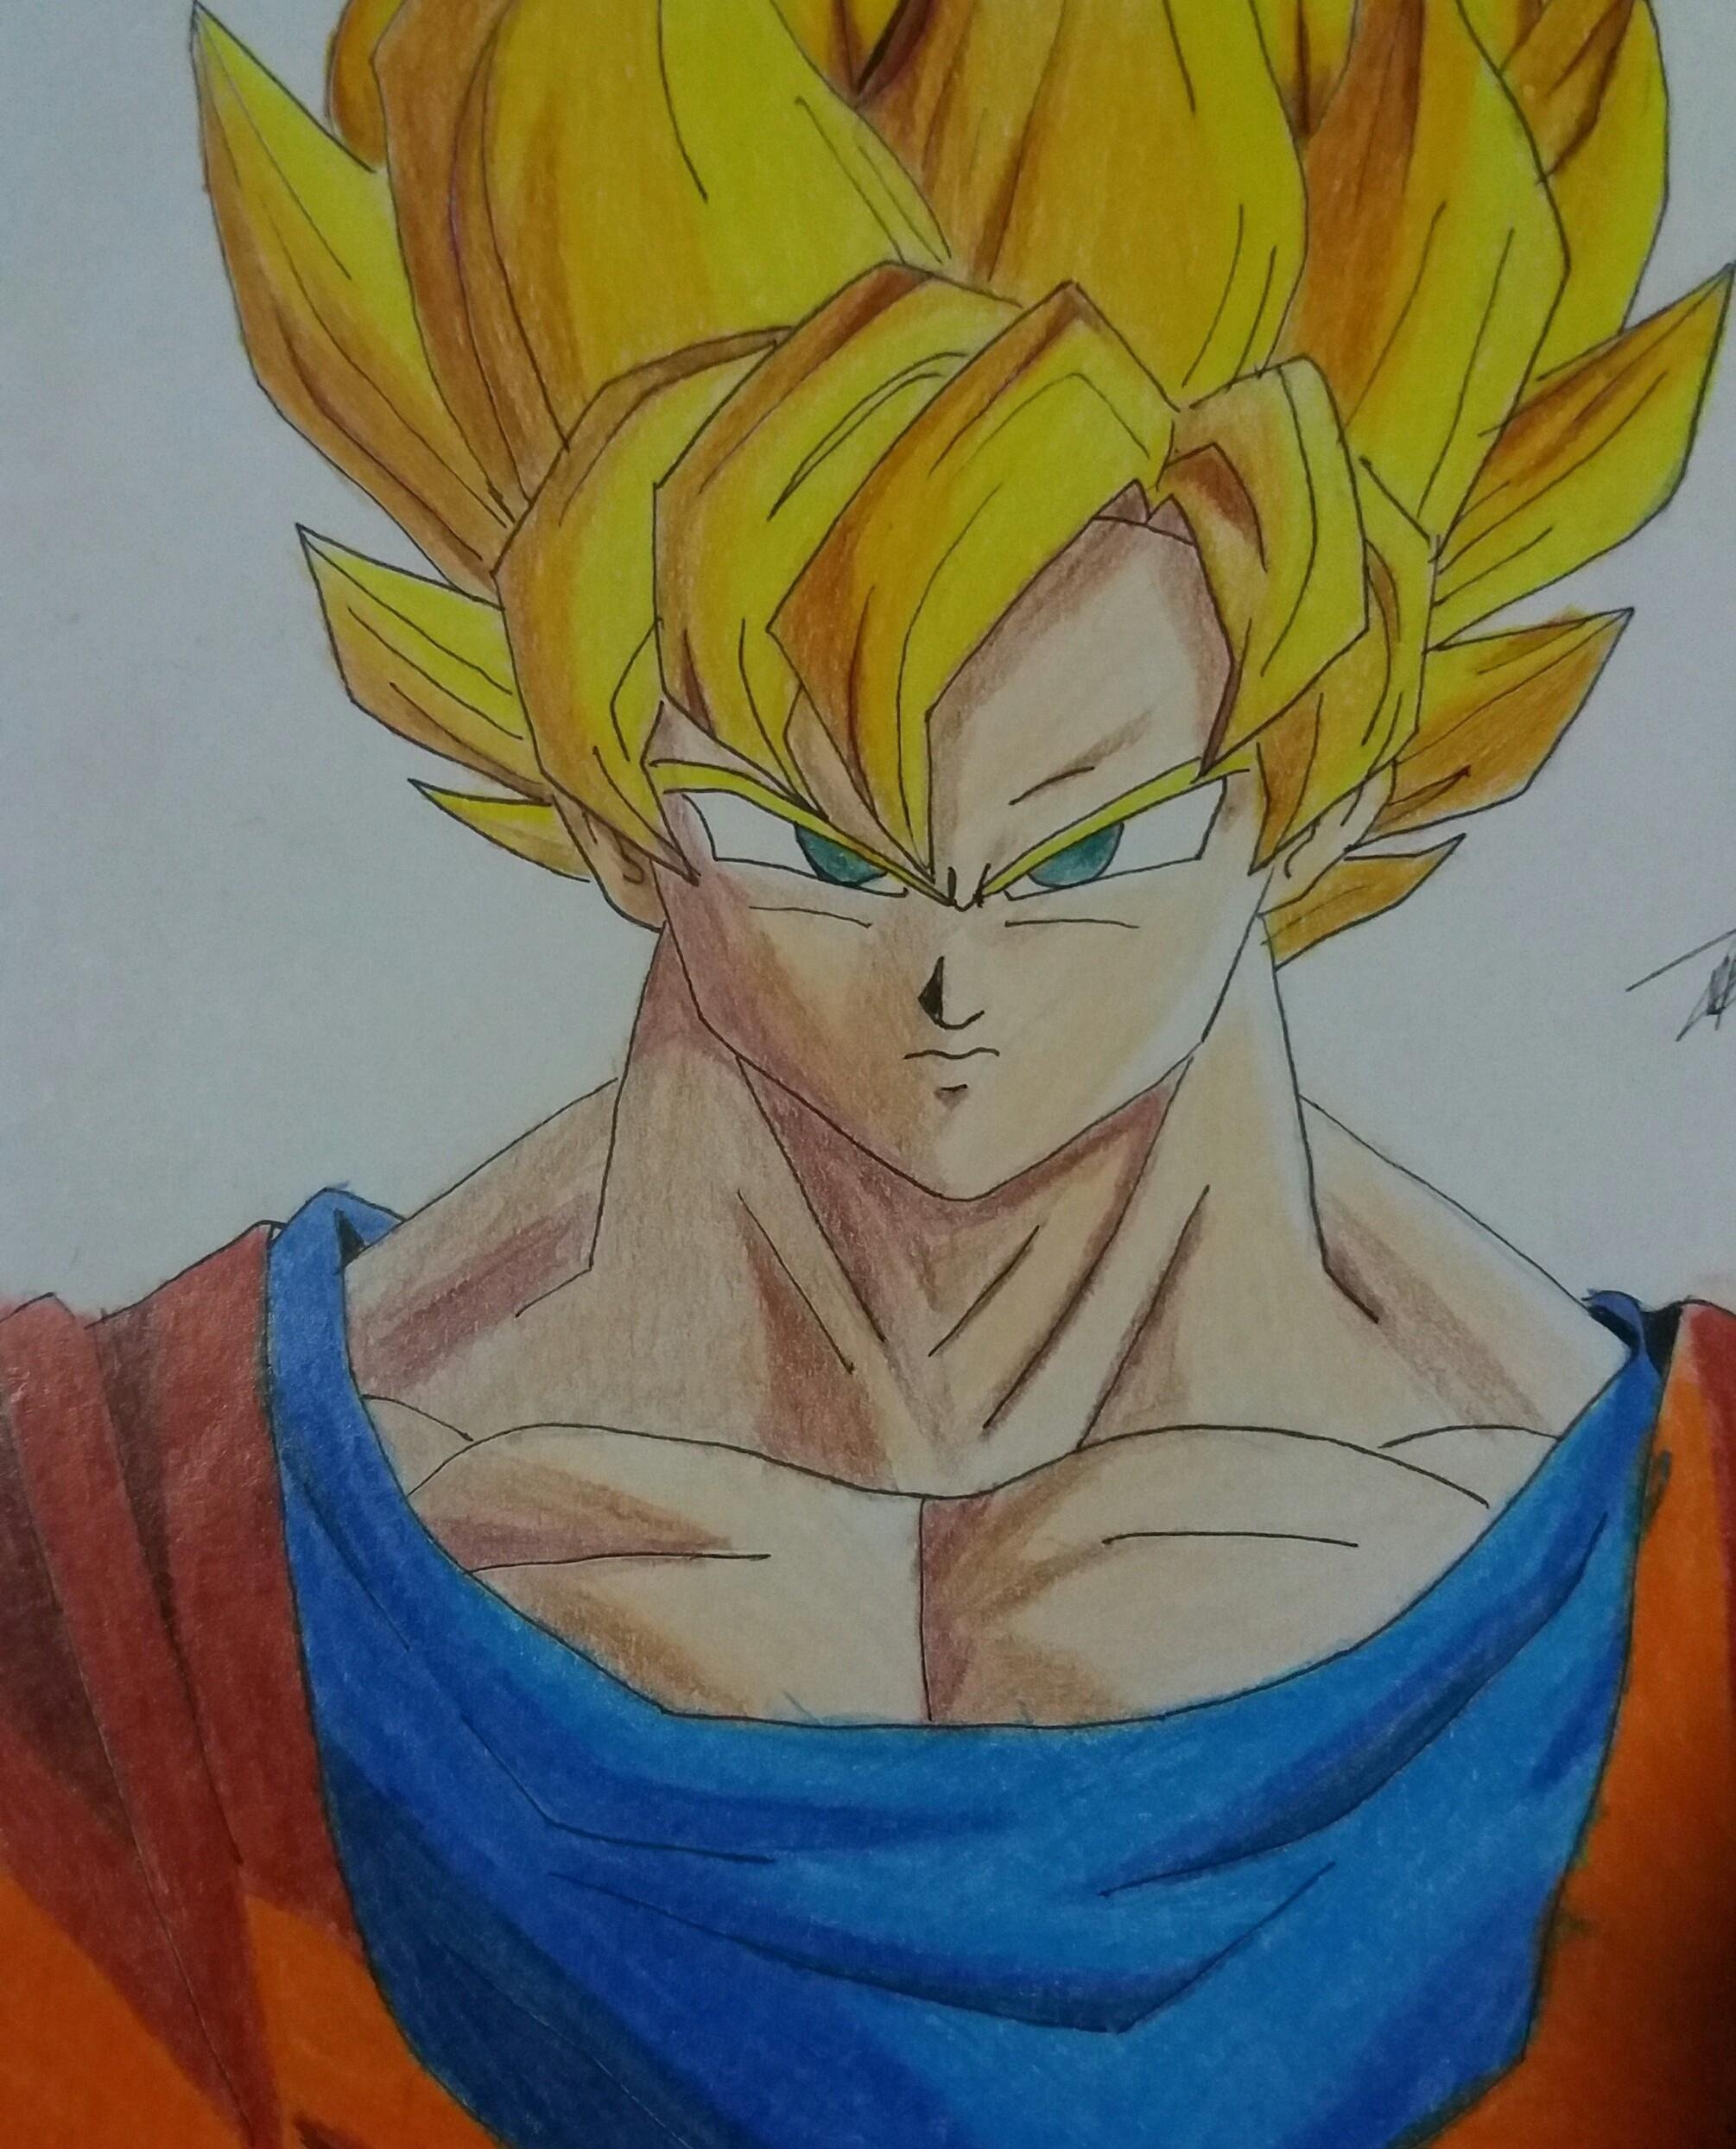 SON GOKU FROM DRAGON BALL Z DRAWING USING COLORED PENCILS STEP BY STEP